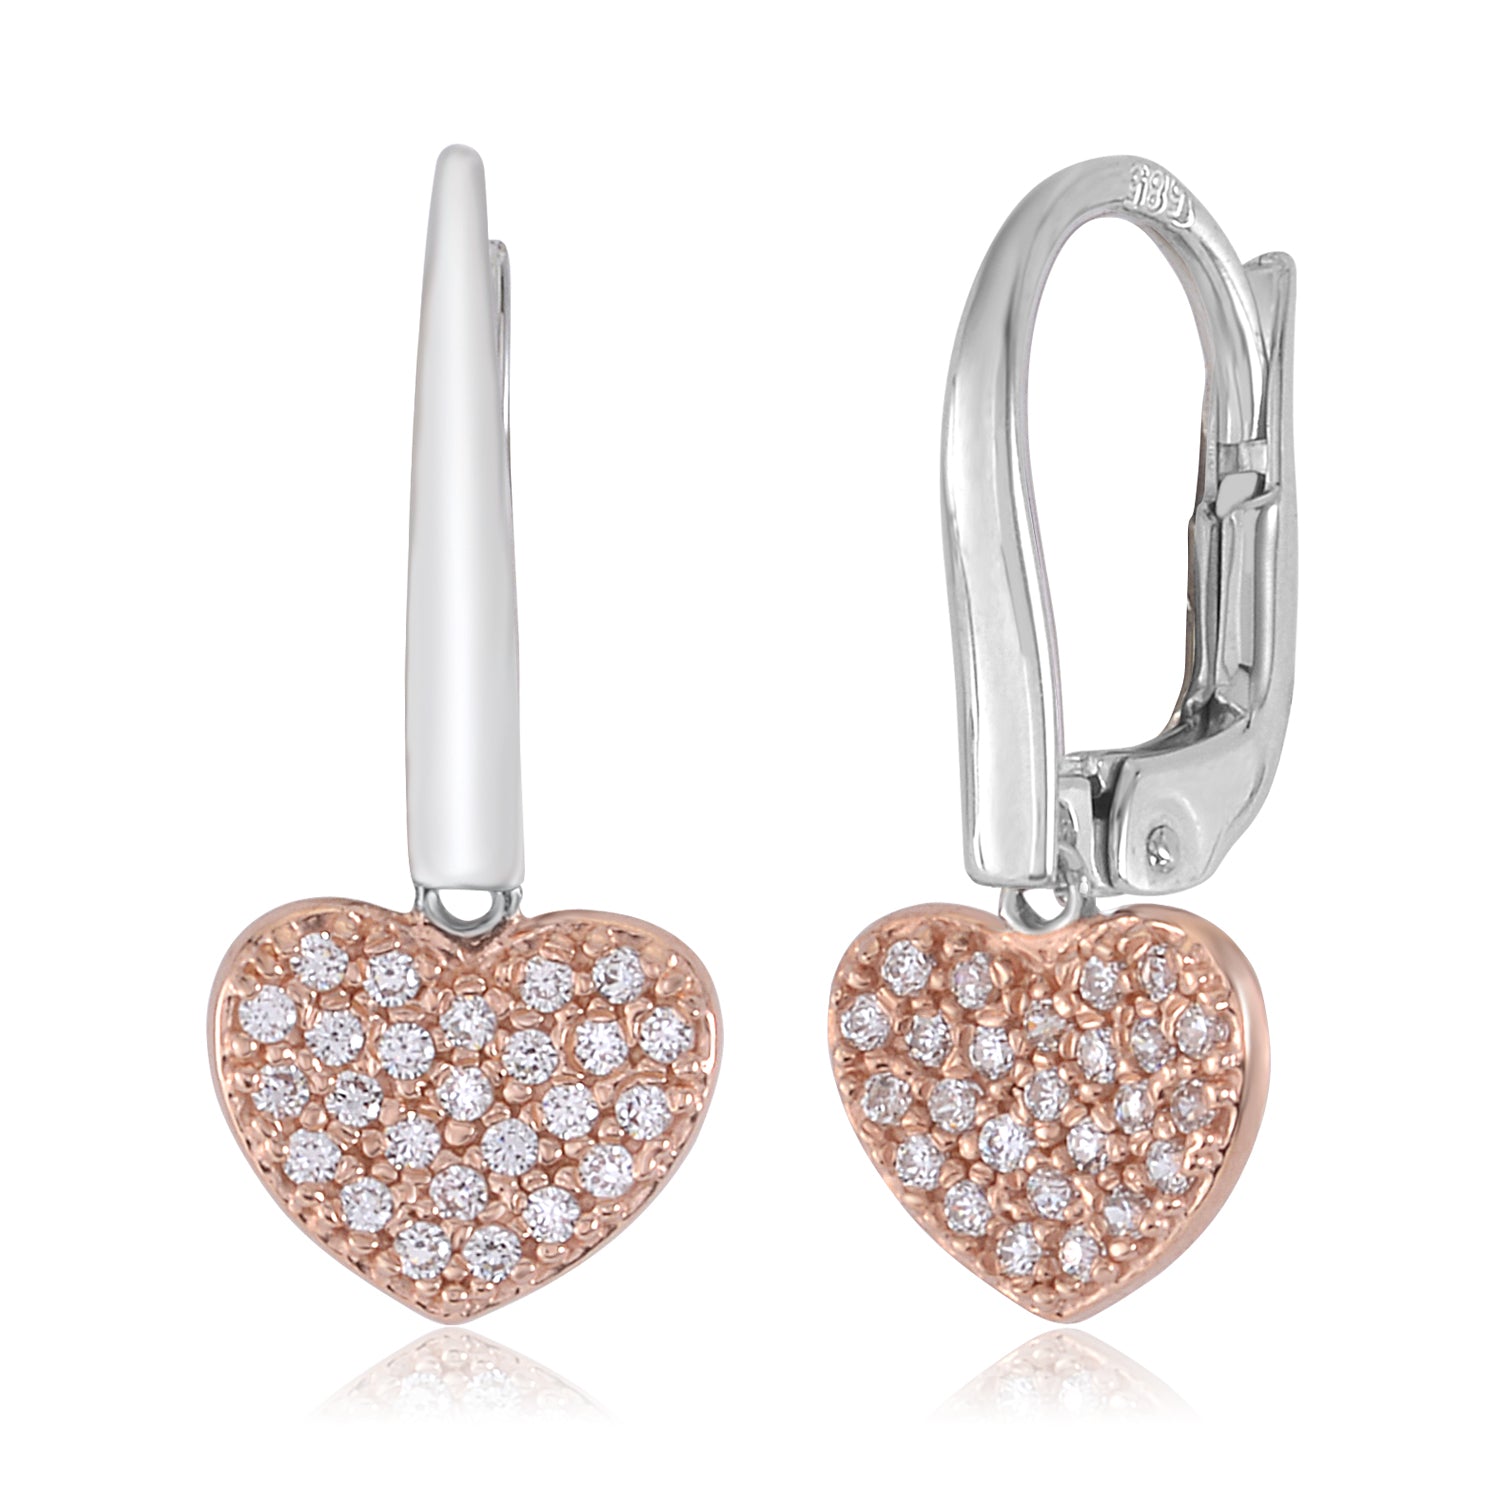 Heart Leverback Earrings in 14k Gold Yellow White Red or Rose with CZ Pave